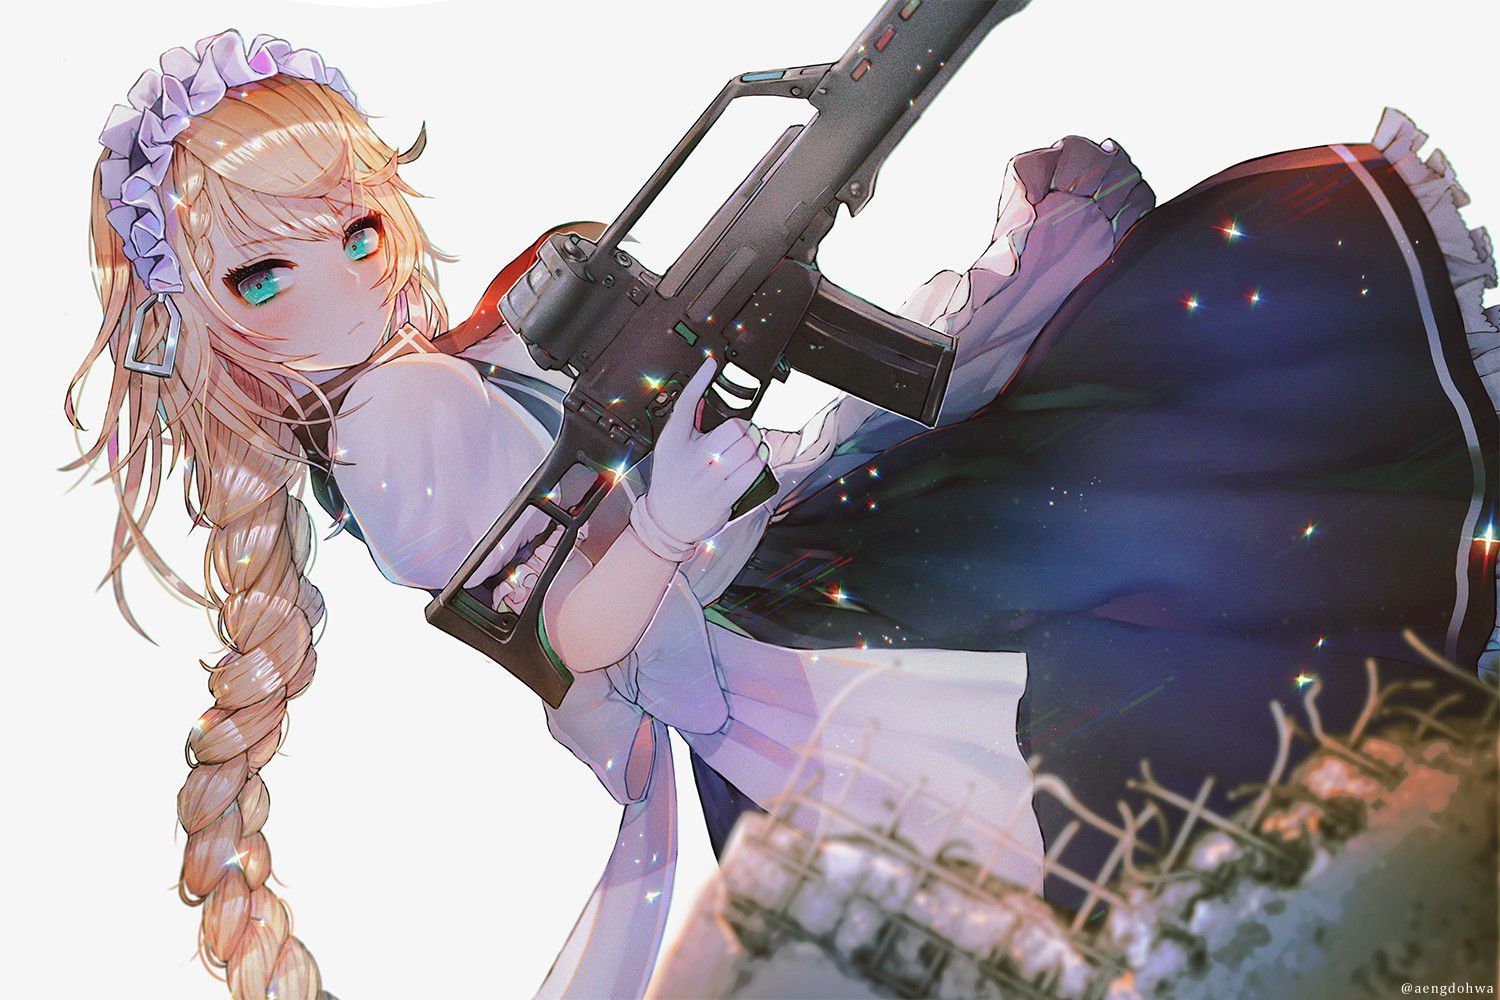 Secondary image of a pretty girl with a firearm, etc. 4 [non-erotic] 13